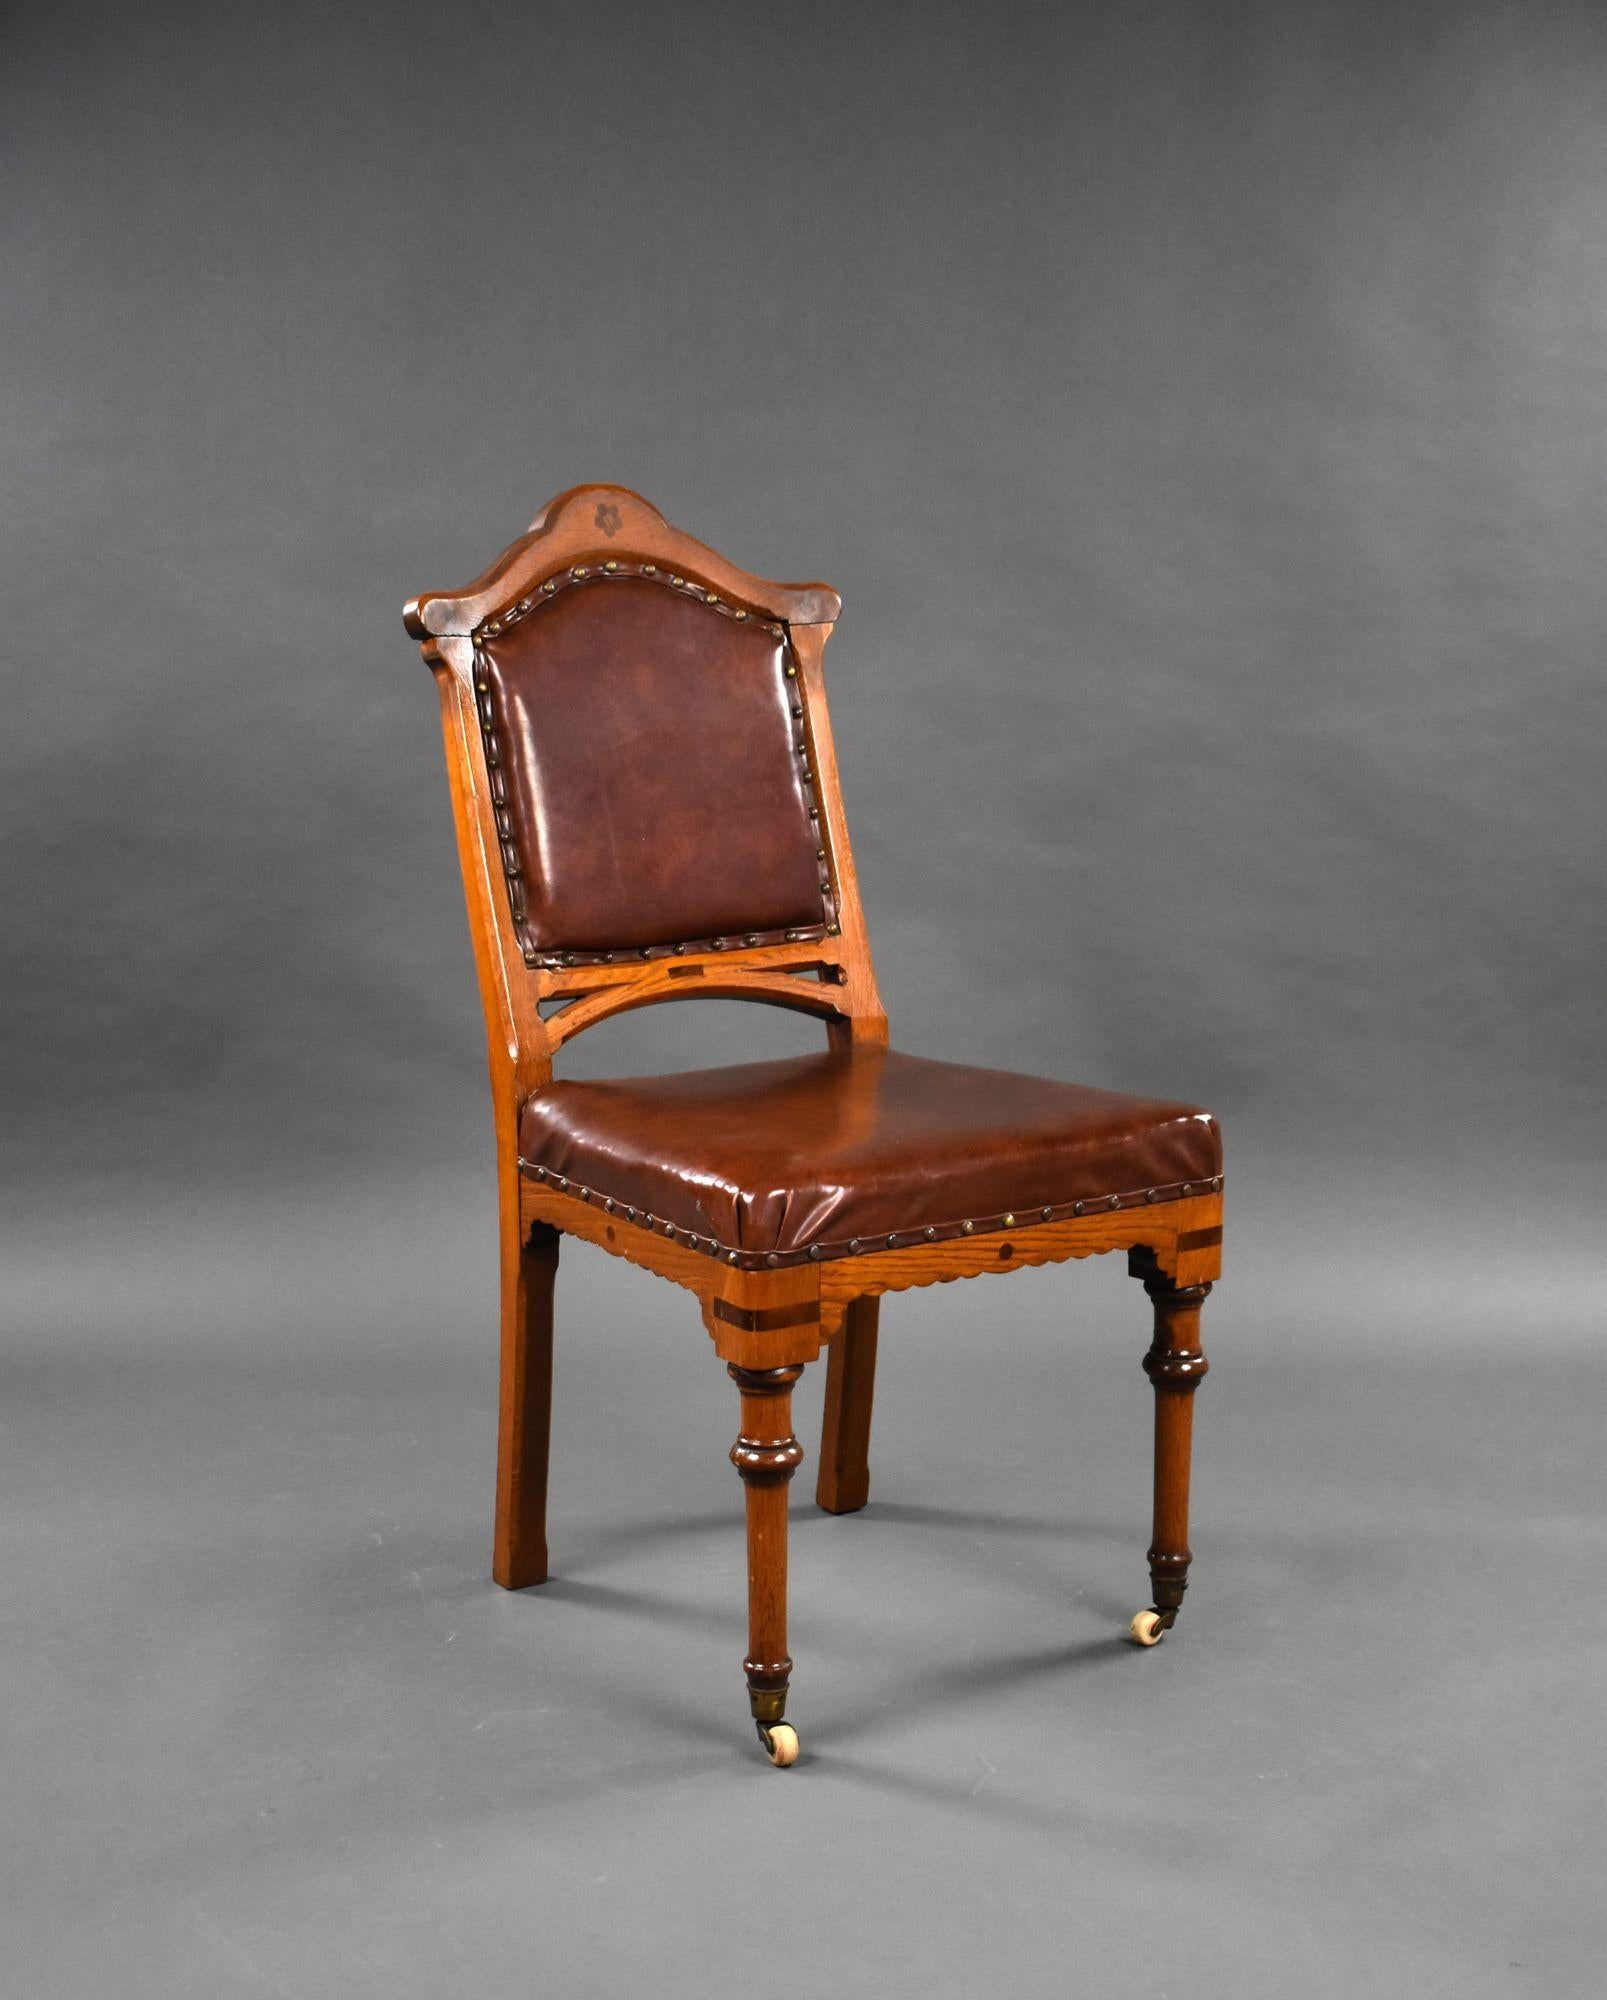 For sale is a set of 6 Victorian oak dining chairs, upholstered in leather, raised on turned legs terminating on castors. All of the chairs are in good condition and remain structurally sound. The upholstery on the seats has shrunk slightly (see